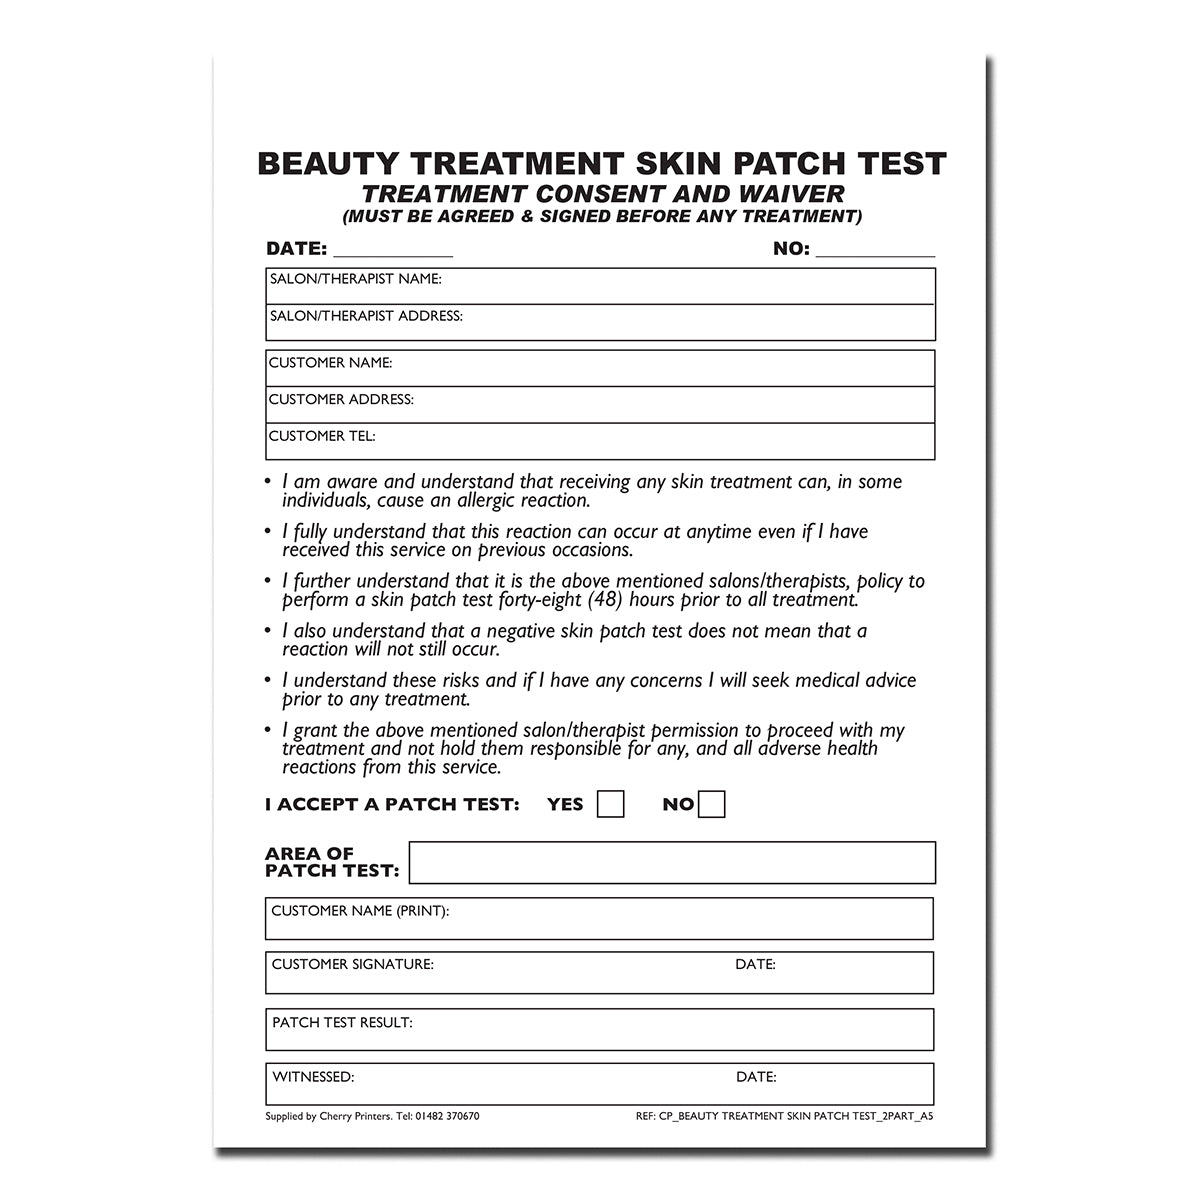 NCR Beauty Treatment Skin Patch Test Duplicate Book A5 50 sets